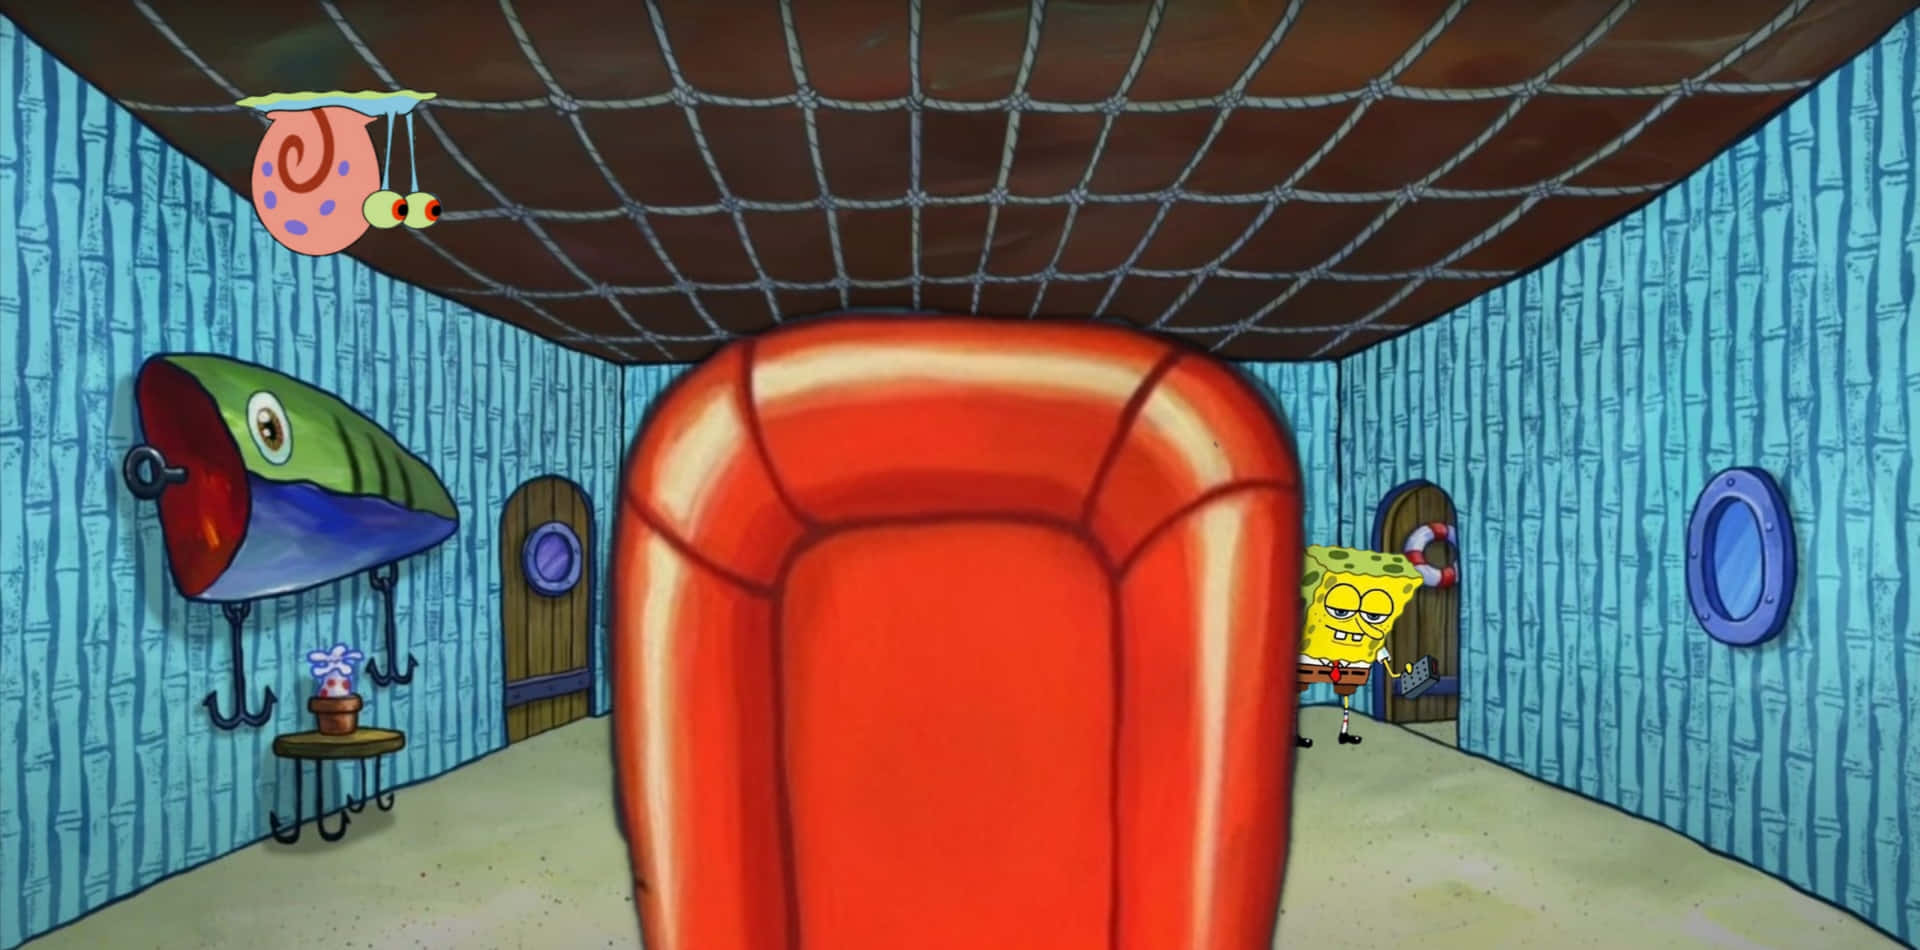 Spice up Your Video Calls with this Fun Spongebob Zoom Background